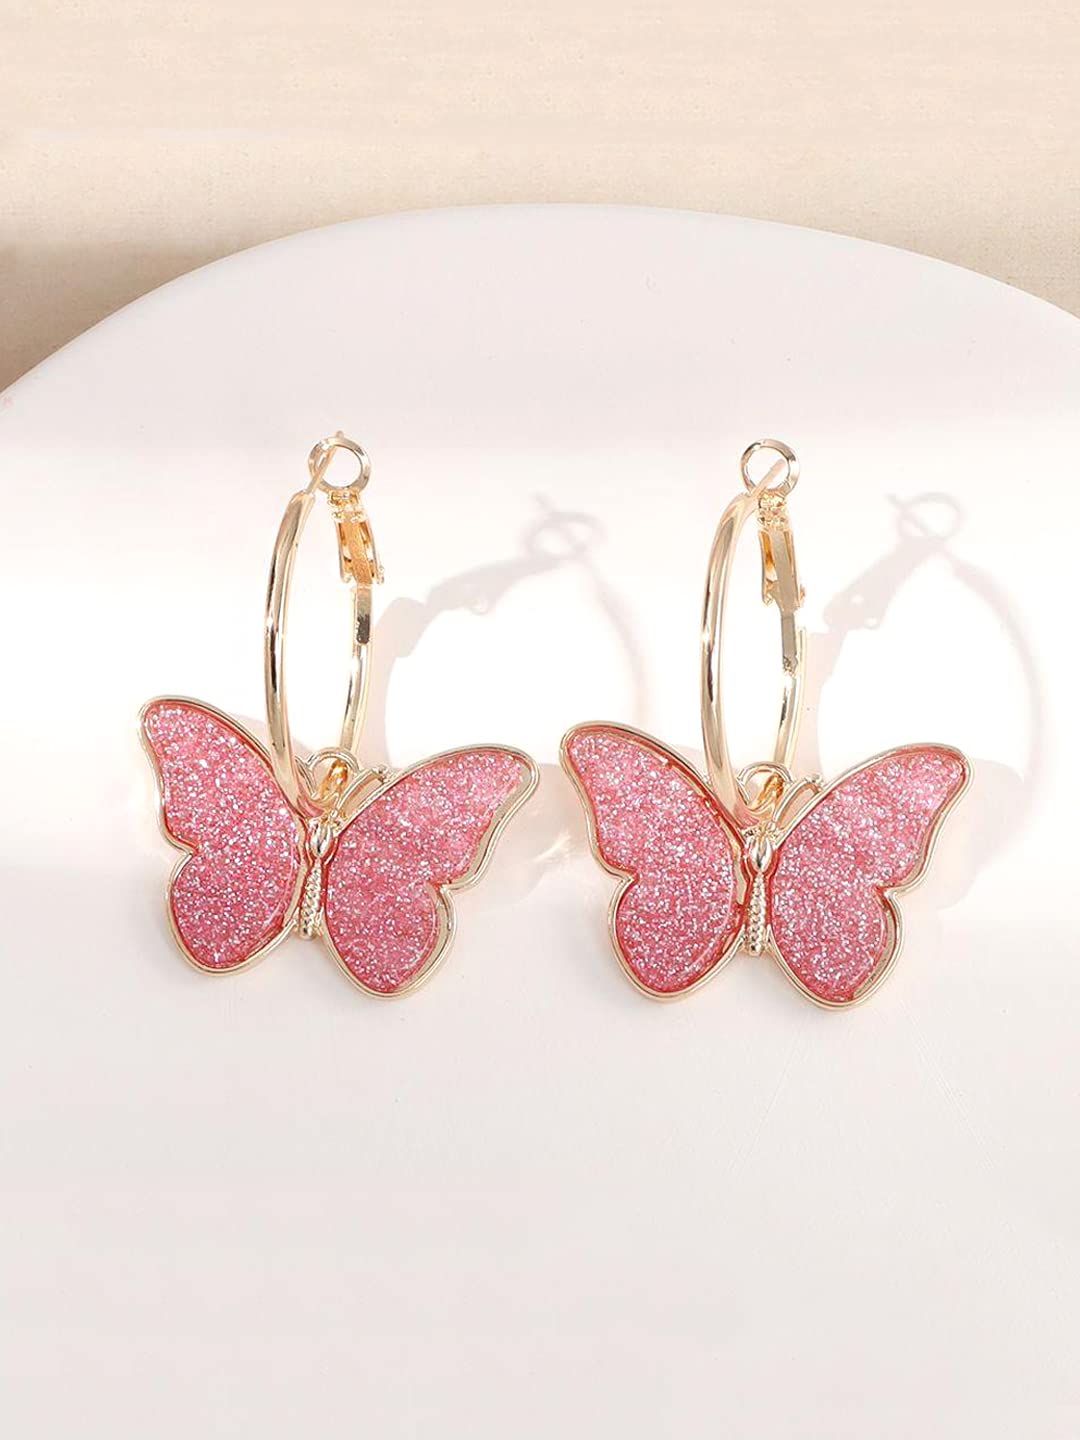 Yellow Chimes Earrings for Women and Girls Drop Earrings for Girls  Gold Plated Pink Color Butterfly Drop Earrings  Birthday Gift for girls and women Anniversary Gift for Wife